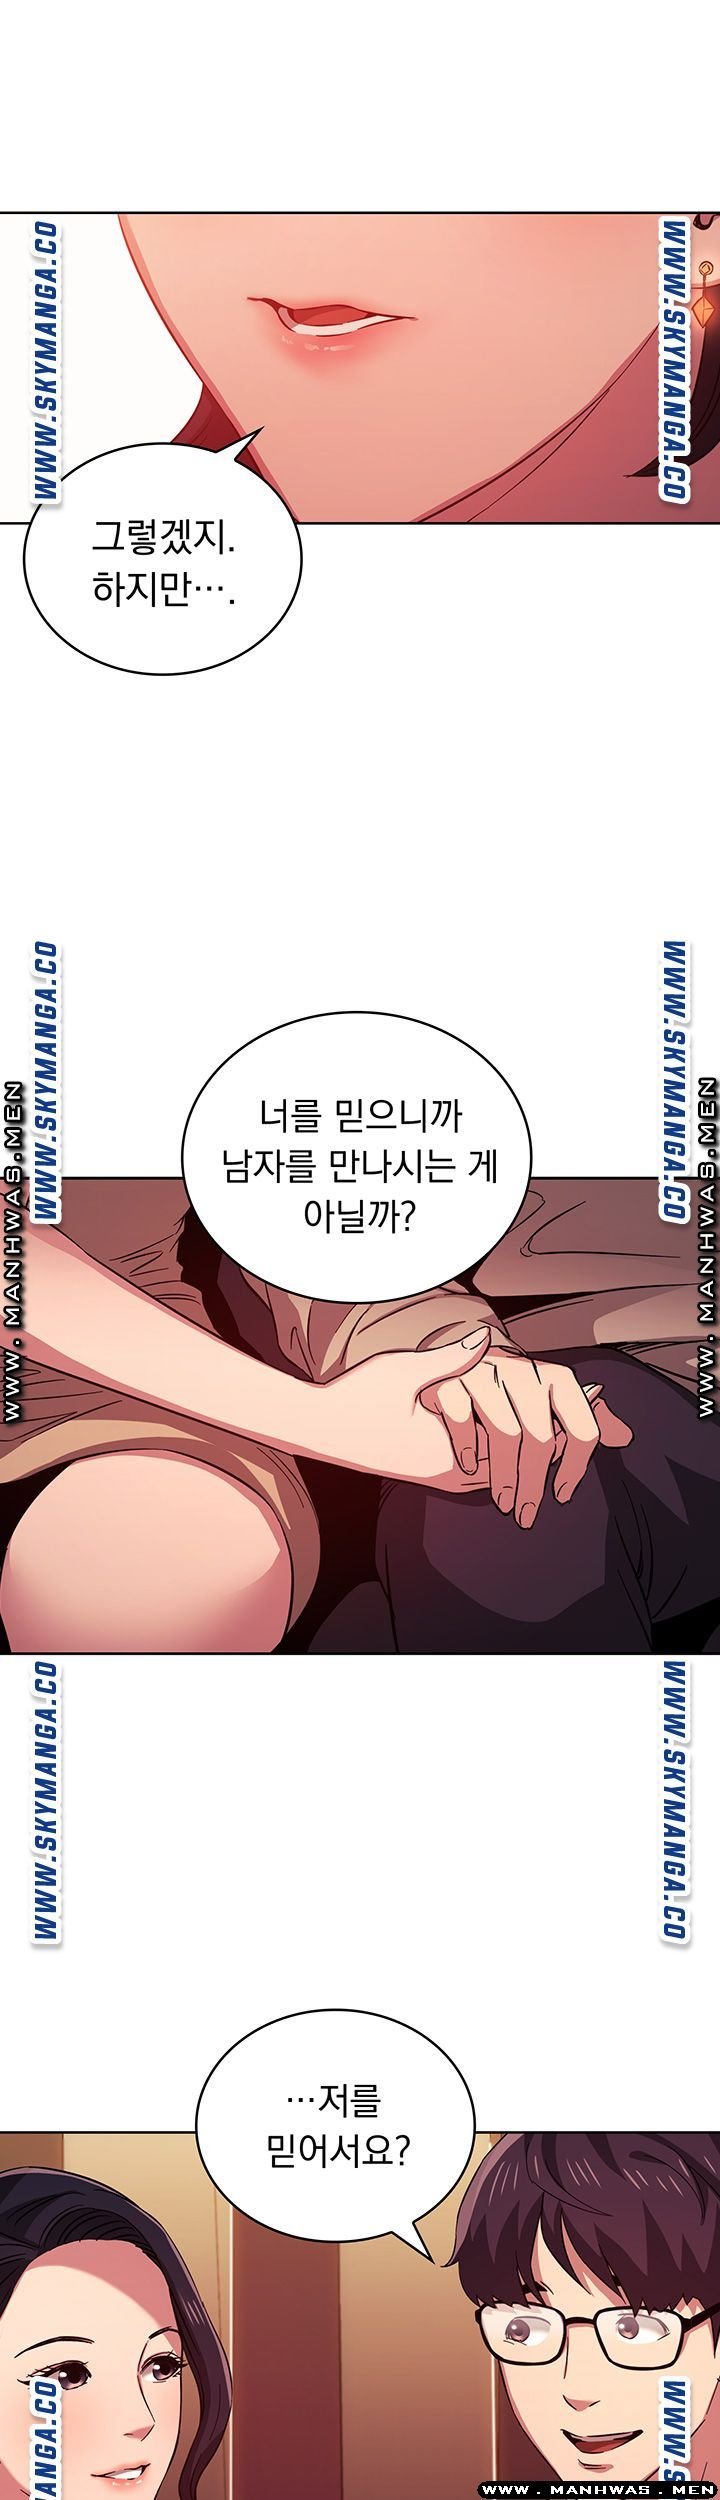 mother-hunting-raw-chap-23-20